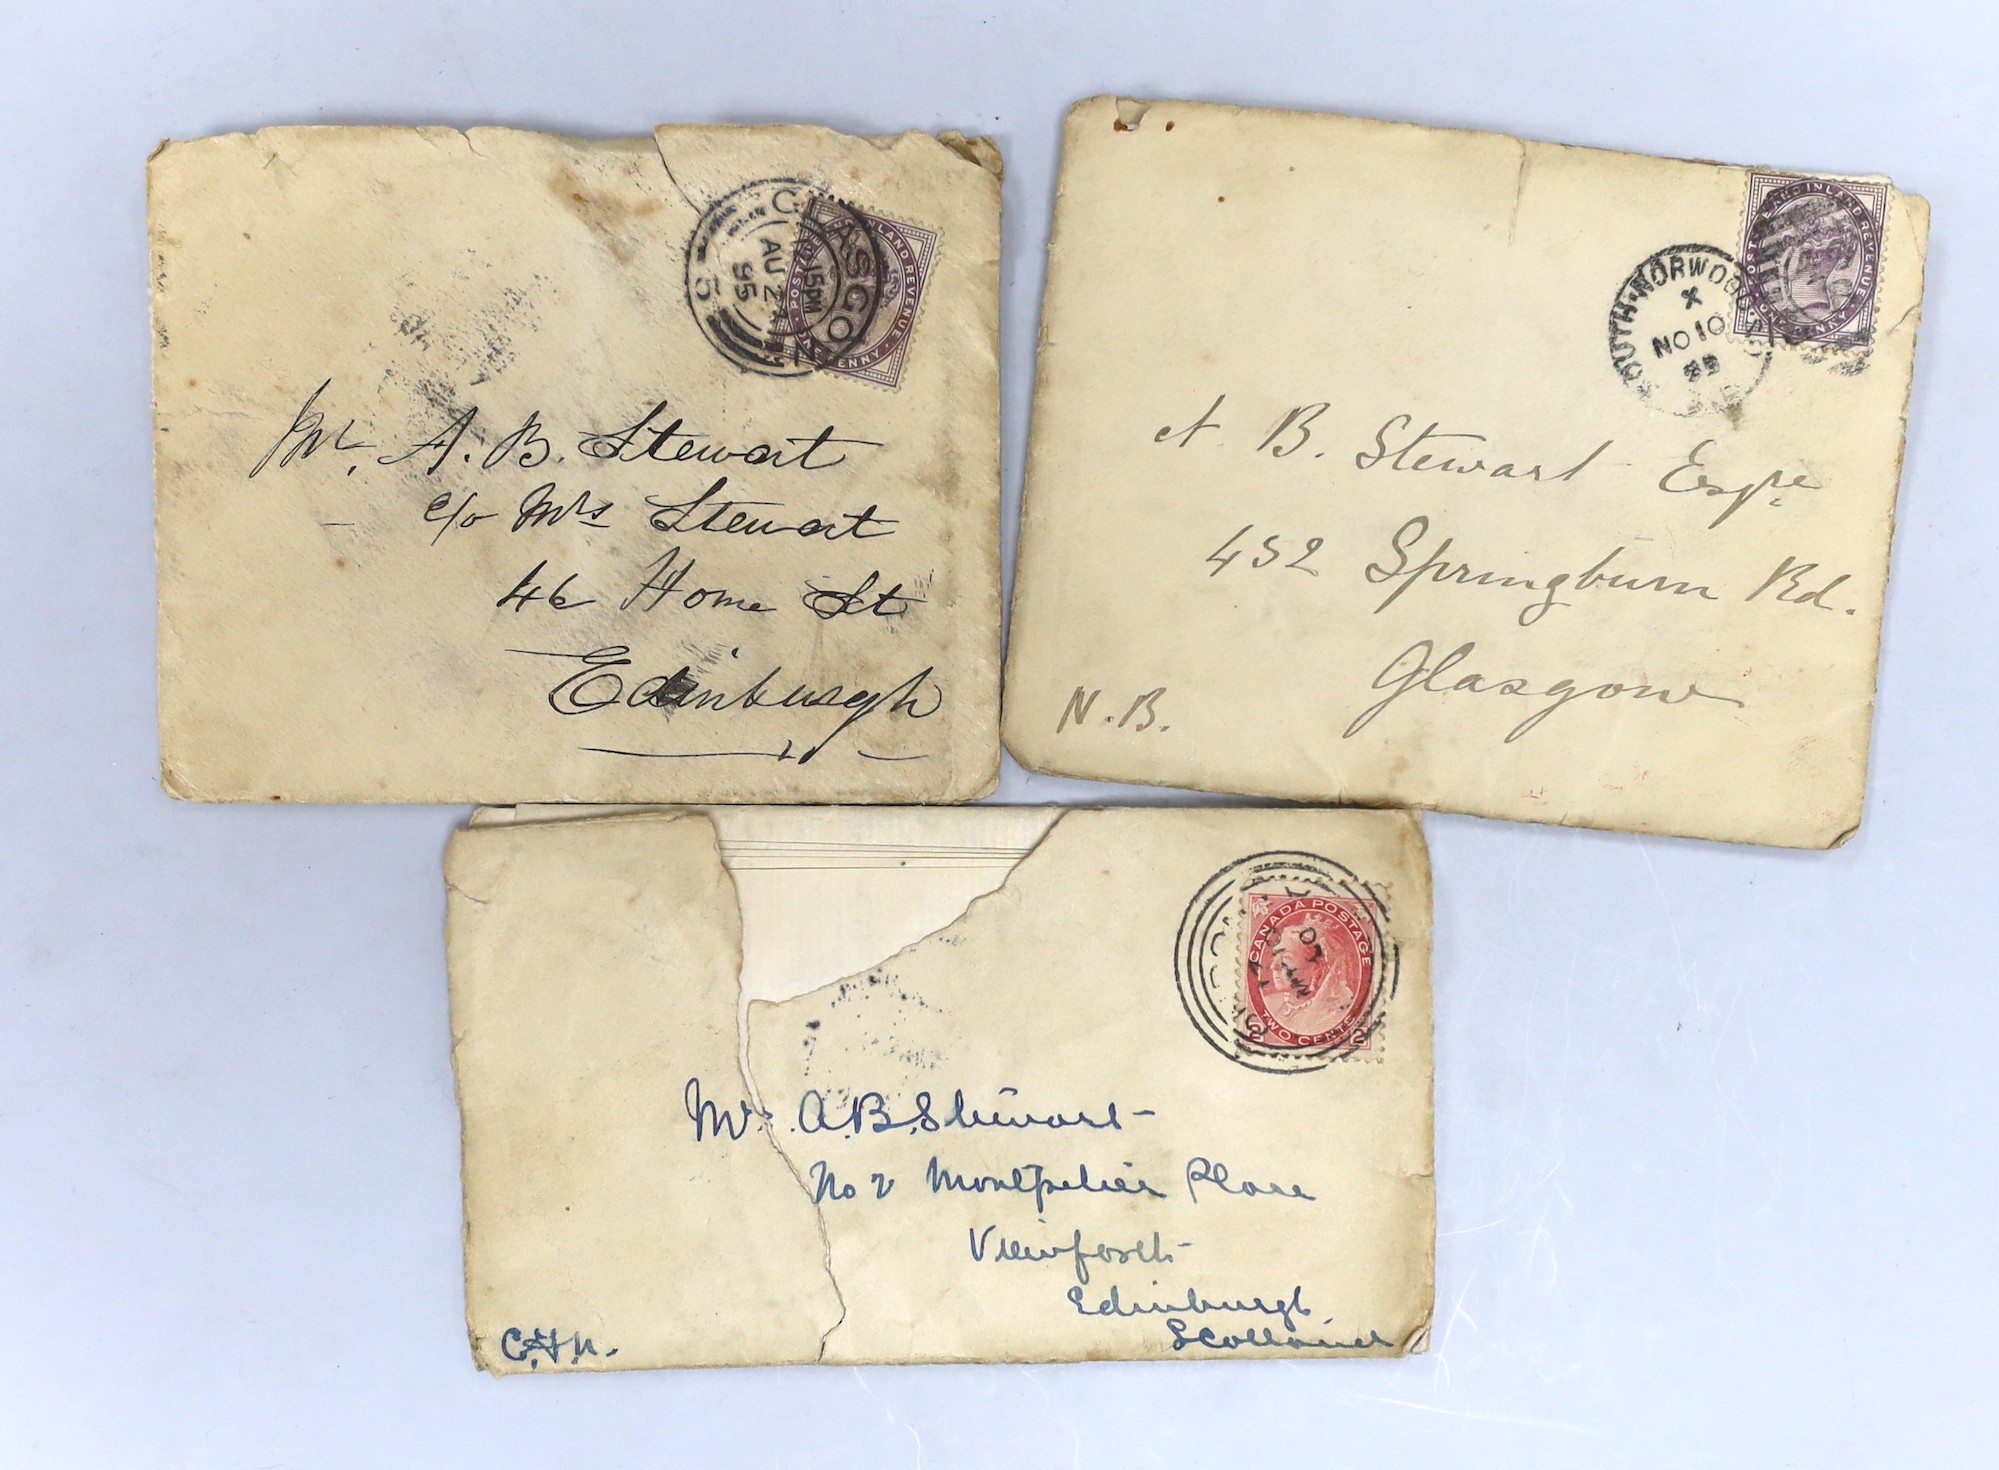 An Arthur Conan Doyle letter (secretarial written) and two other letters (unknown)                                                                                                                                          